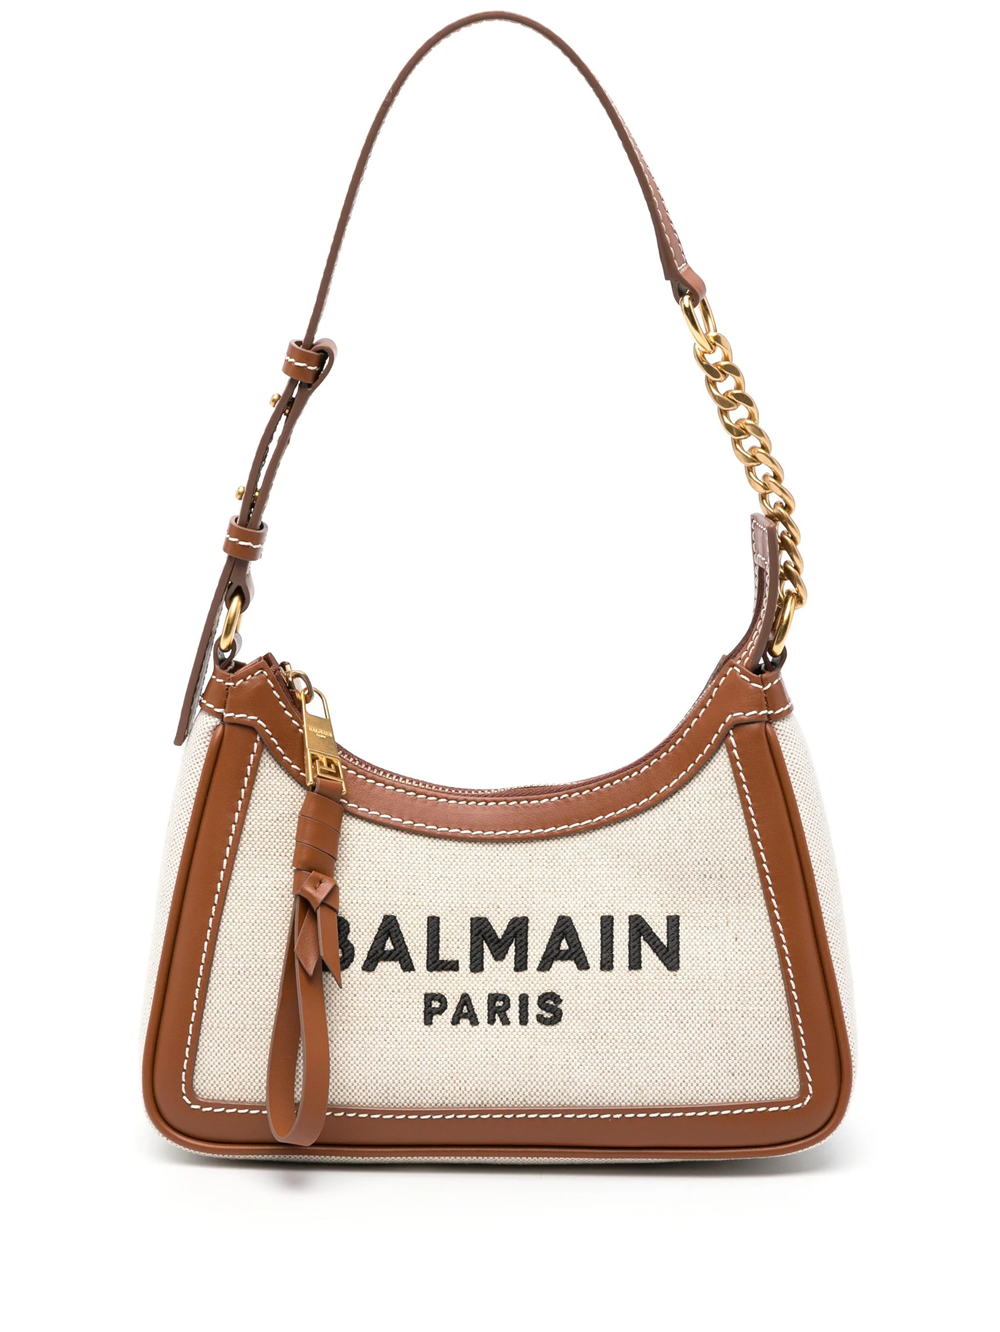 Balmain Shoulder Bag With Embroidered Logo In Nude & Neutrals